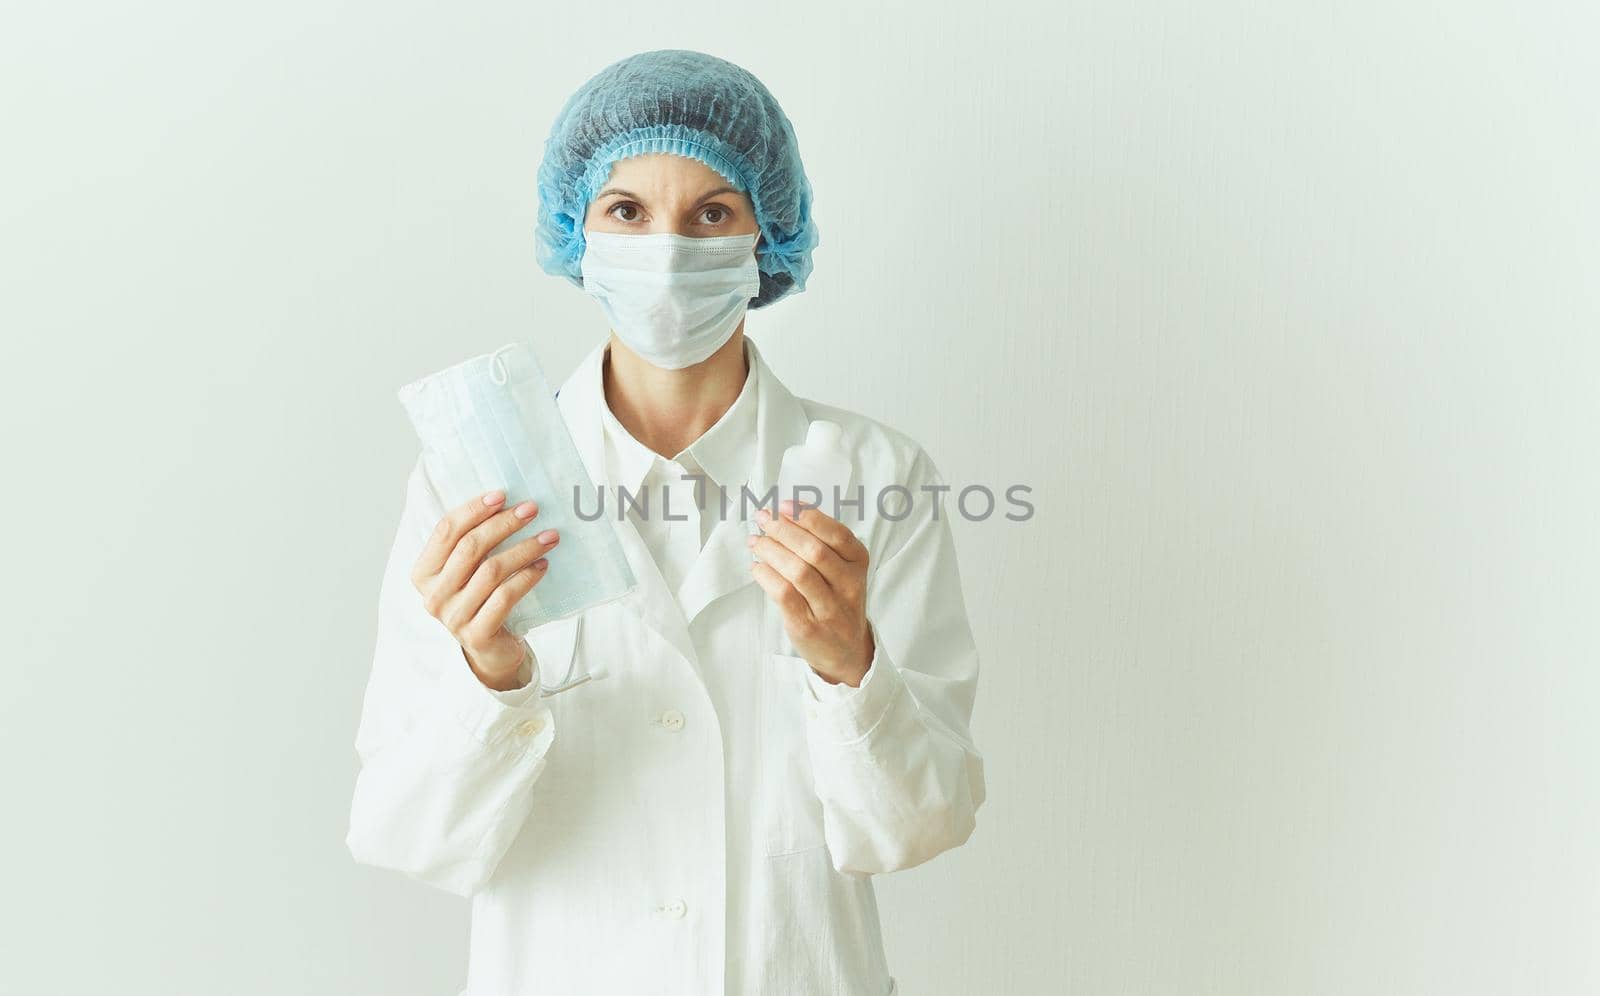 Female doctor in medical mask and uniform offers mask and disinfectant in bottle to prevent from coronavirus. Covid-19 protection, medical information. Copy space